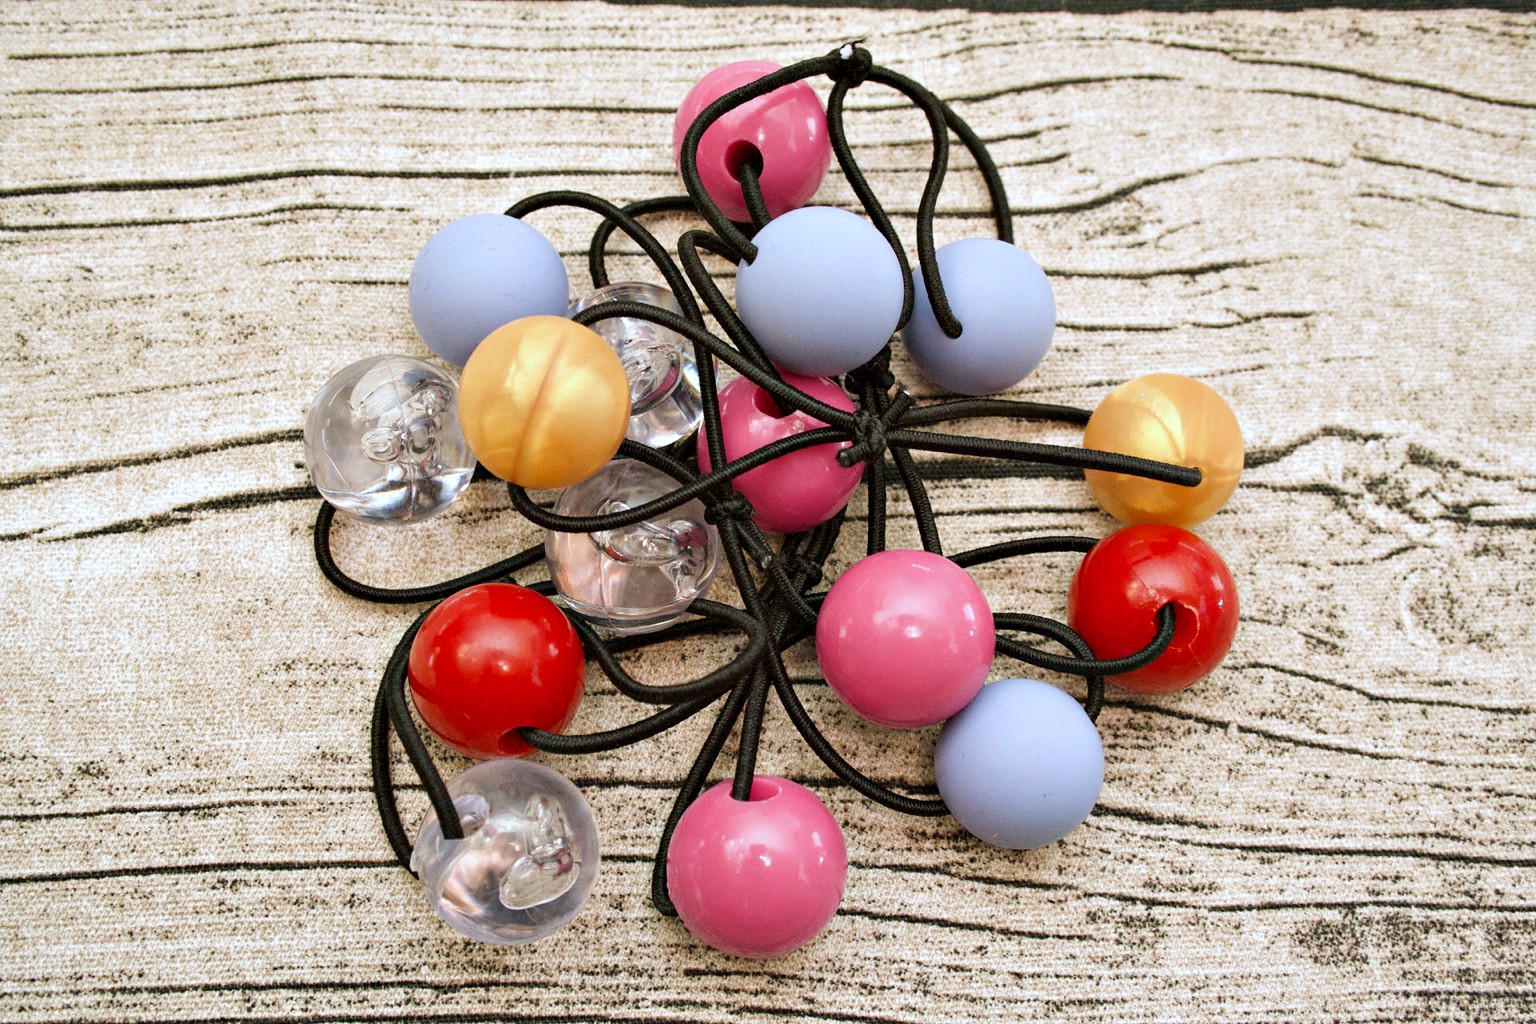 14 Pieces Double Balls Ponytail Elastics Holders Colorful Kids Hair Ties  with Balls Cute Ball Hair Ties Circle Bubble Hair Bands Rubber Hair  Elastics Ties Hair Accessories for Baby Toddler Girls Women :